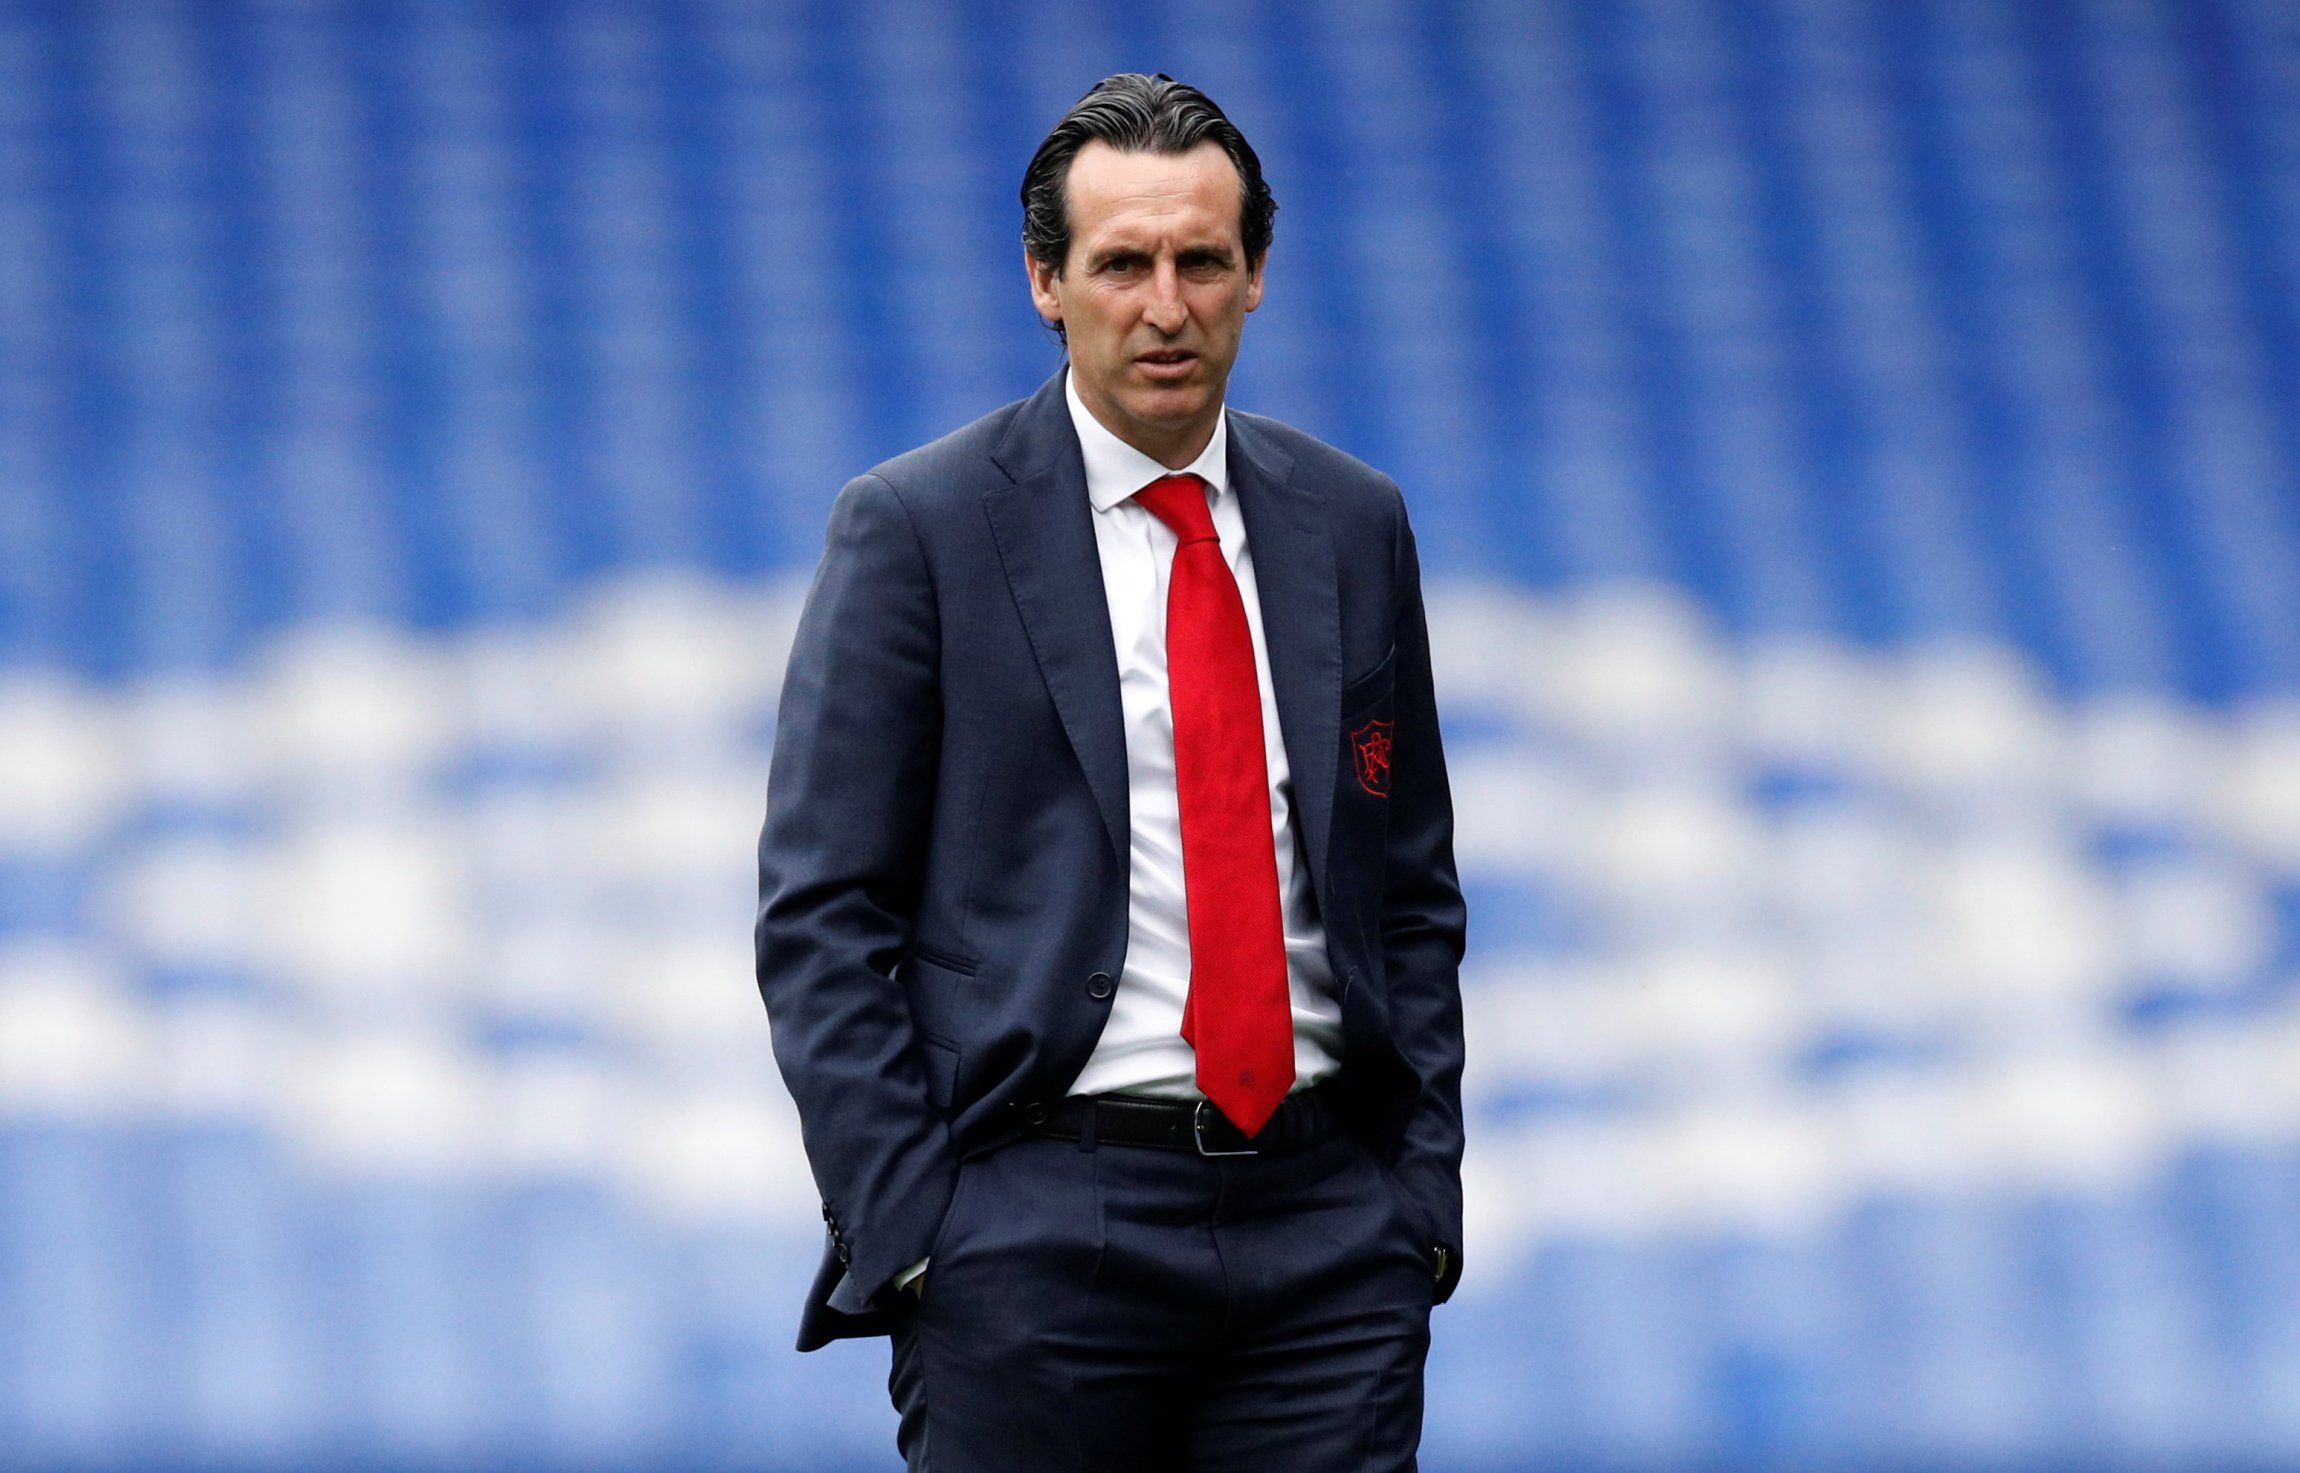 Arsenal manager Unai Emery on pitch prior to Everton clash